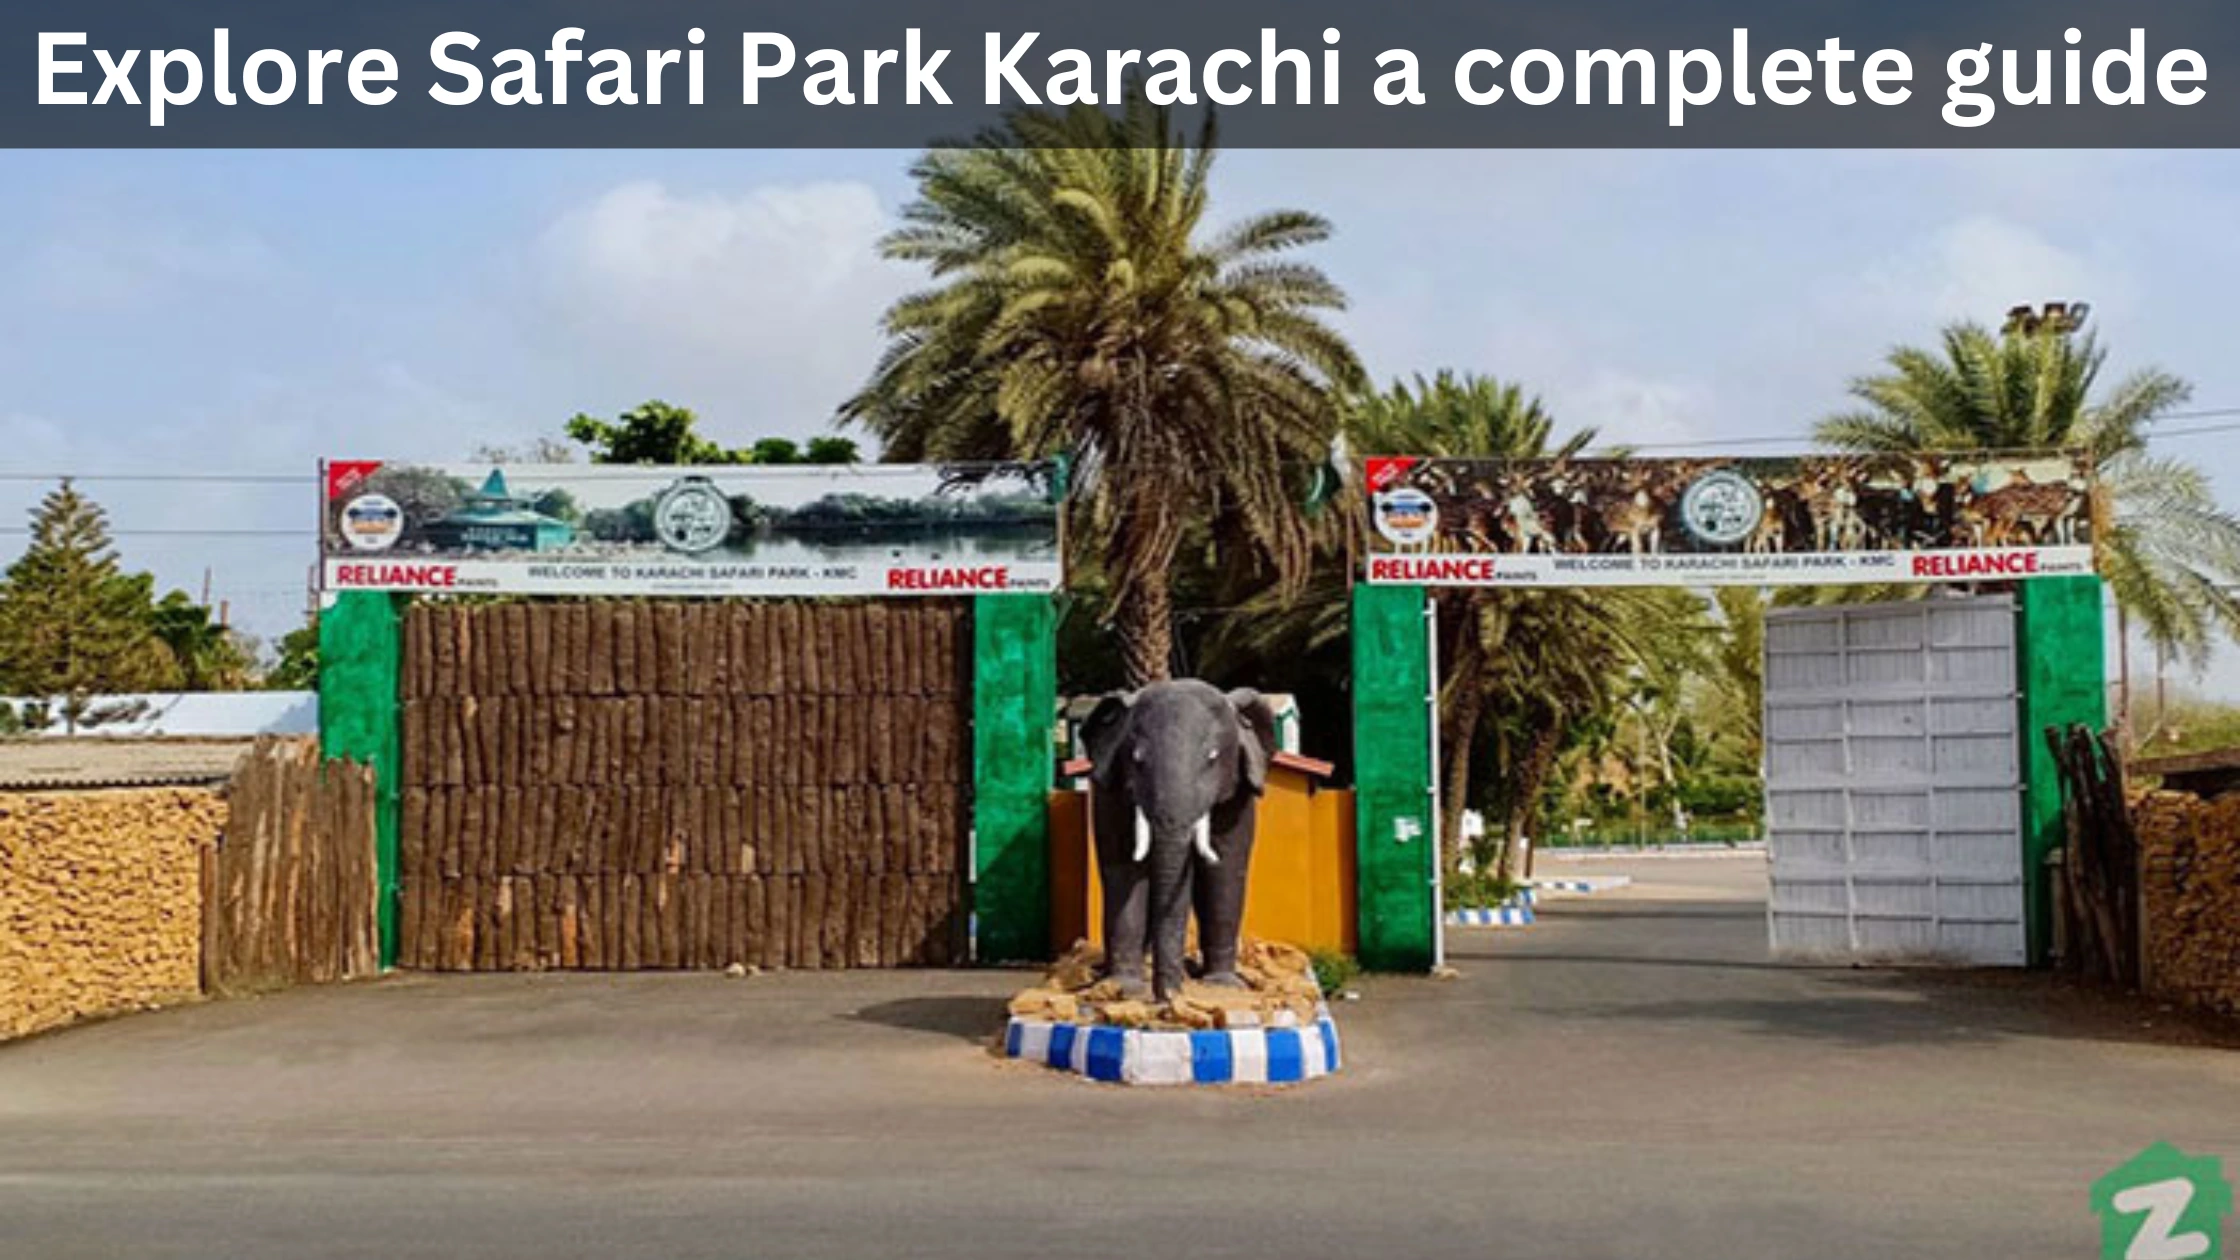 All you need to know about Safari Park Karachi